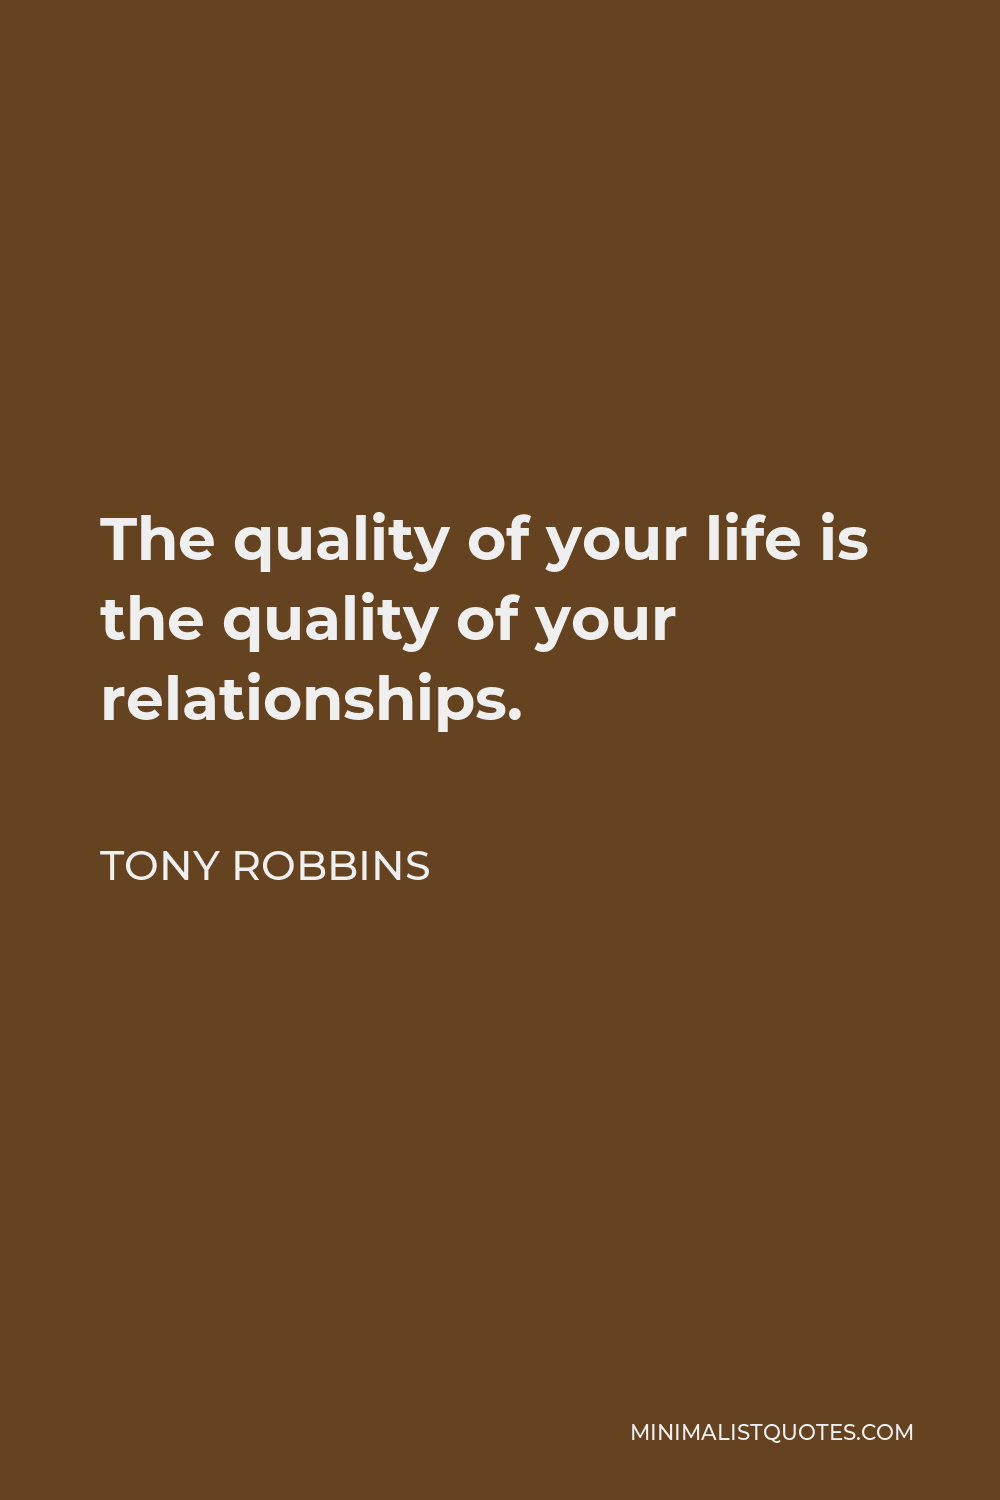 Tony Robbins Quote - The quality of your life is the quality of your relationships.